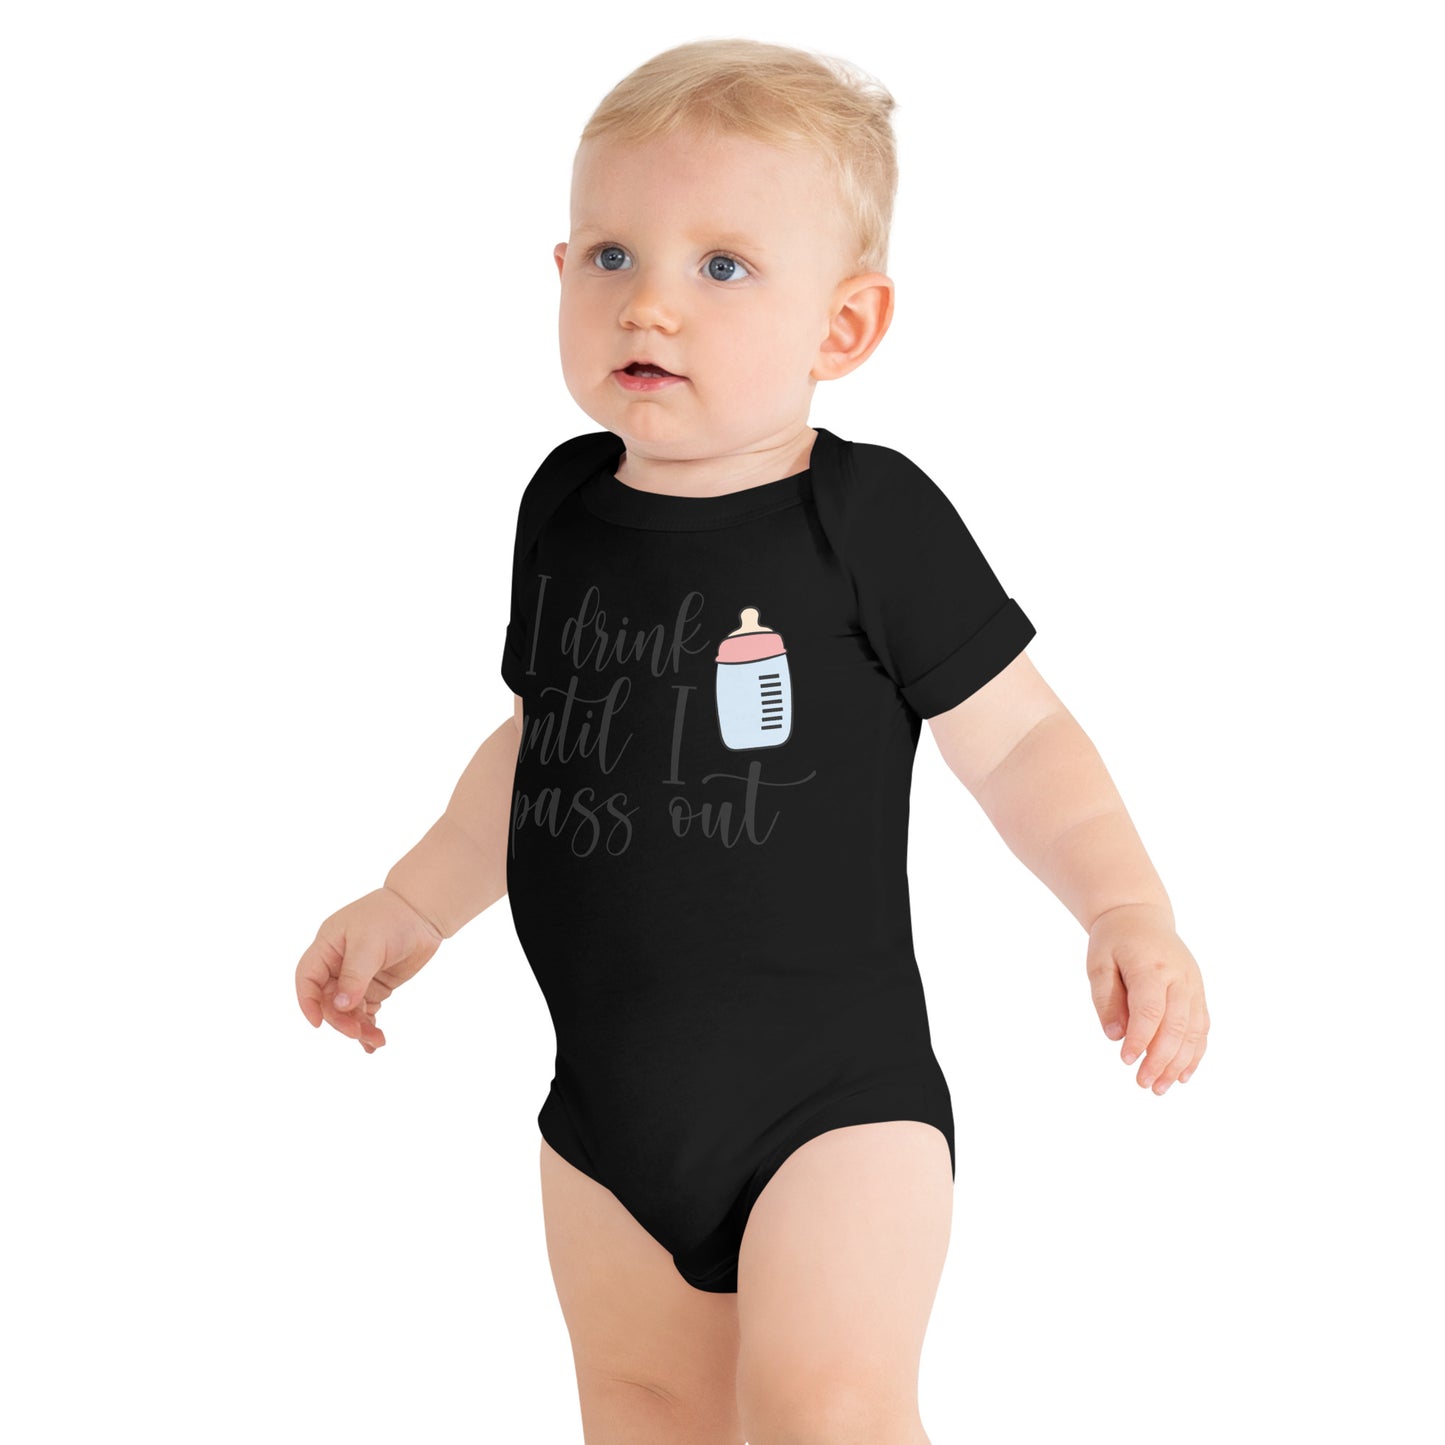 Baby short sleeve one piece - I Drink Until I Pass Out